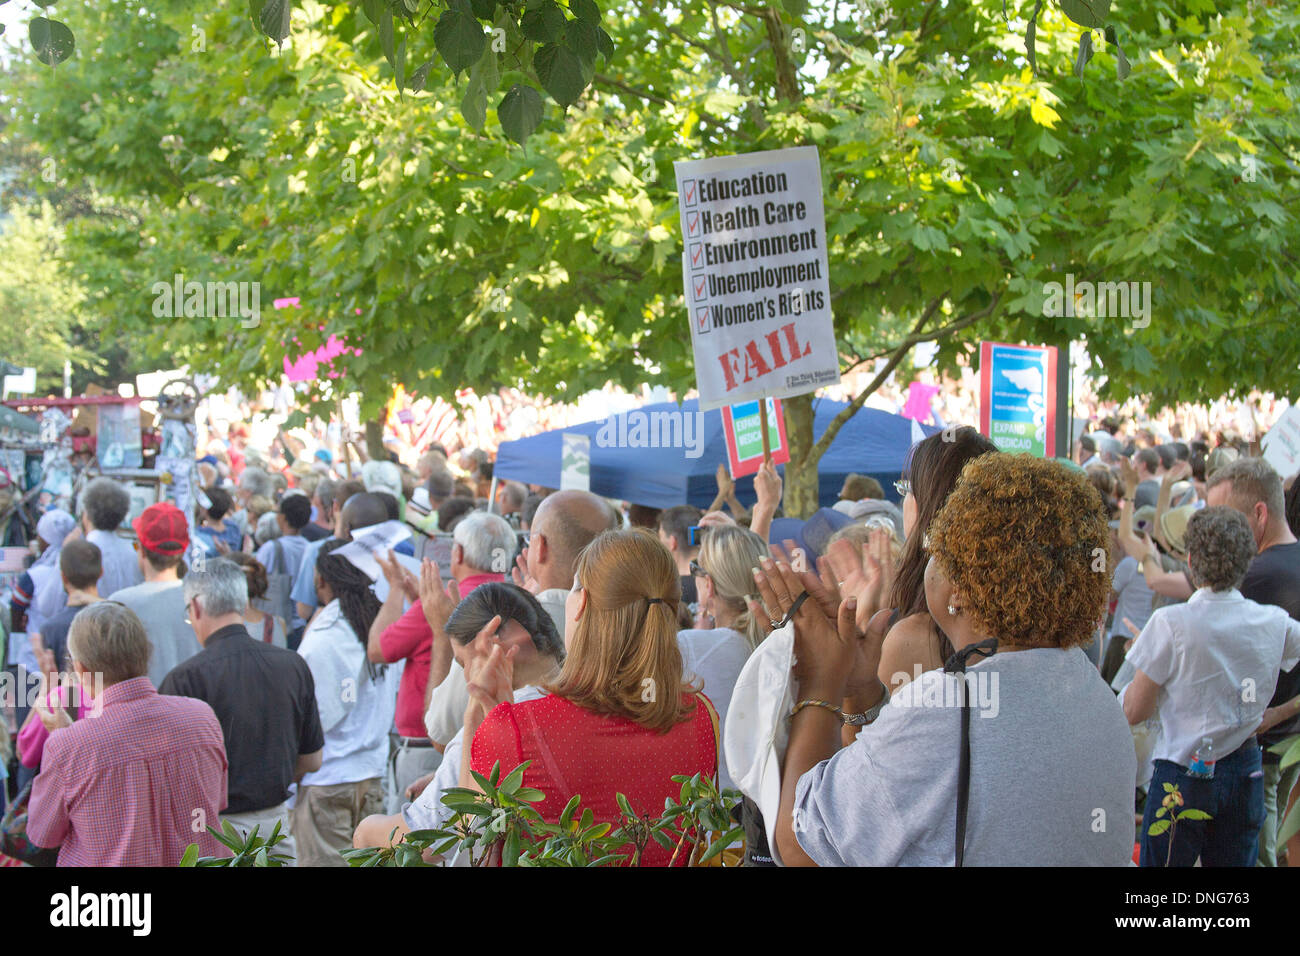 Large crowd attends a political Moral Monday Political Protest Rally in downtown Asheville, NC Stock Photo